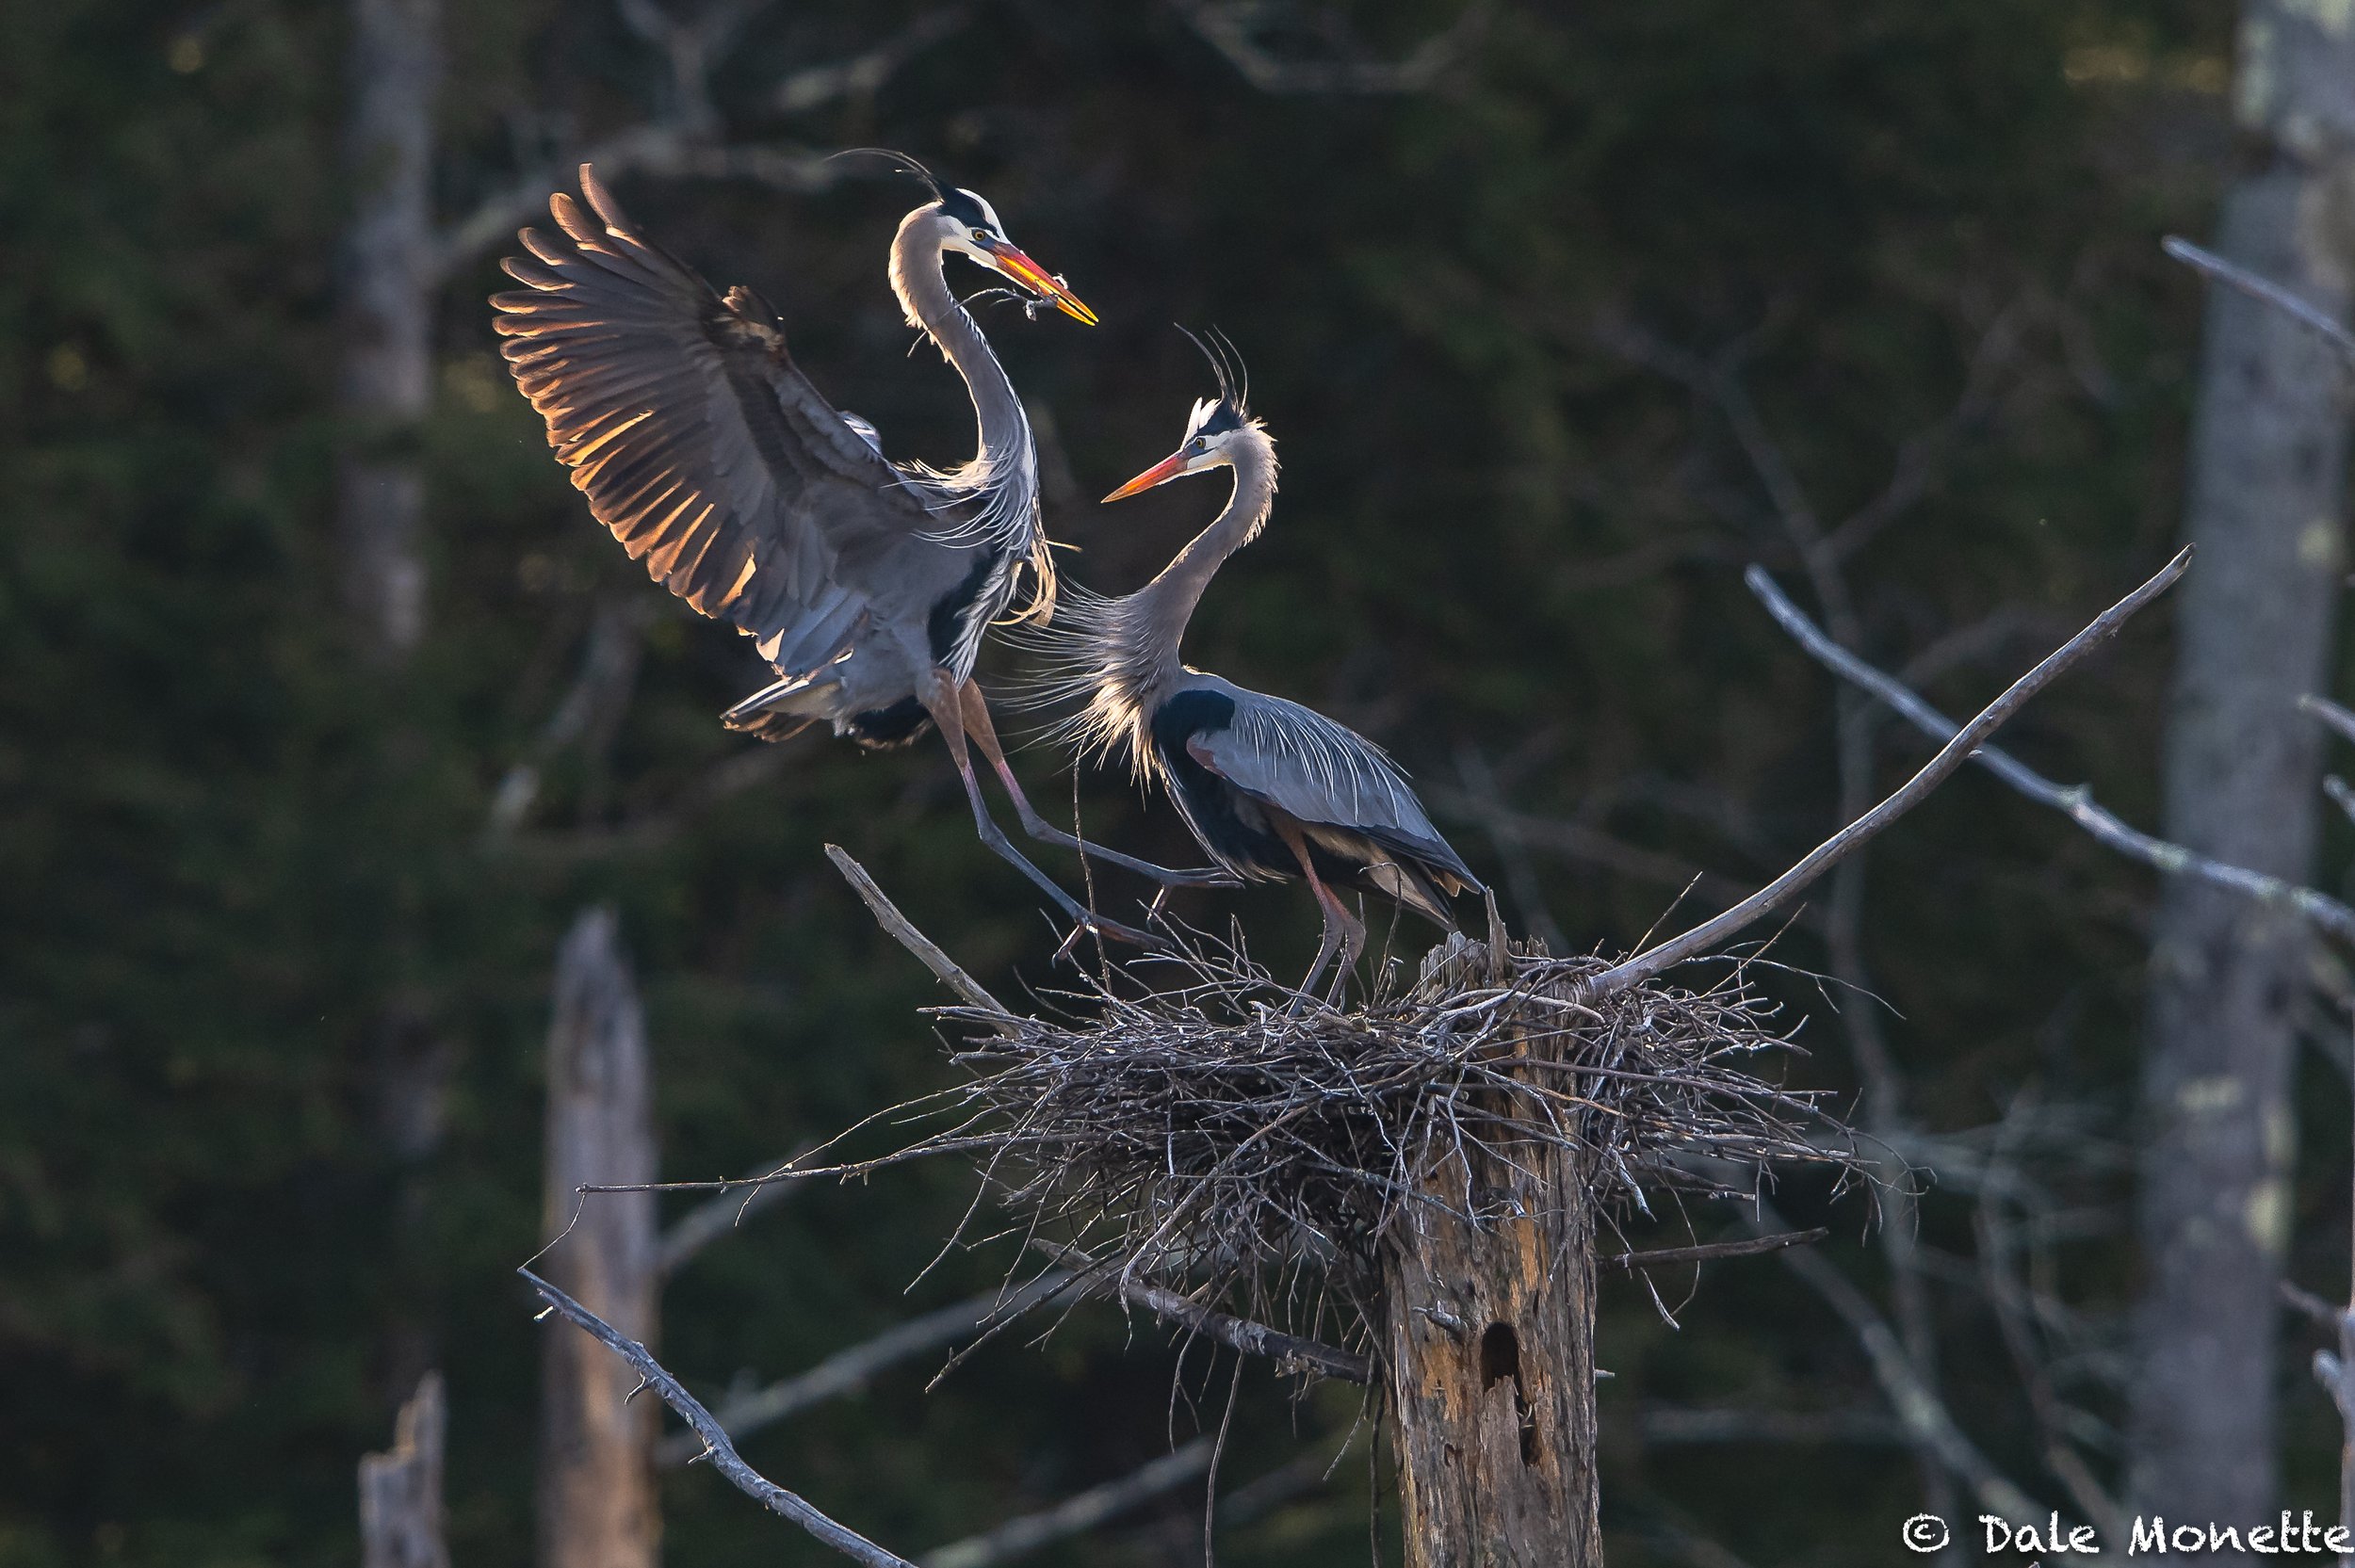   Nest building time for great blue herons, in this case just fixing up from the winter winds. Nikon Z9, Nikon 600mm f4 ed ...... backlit from the early rising sun.  